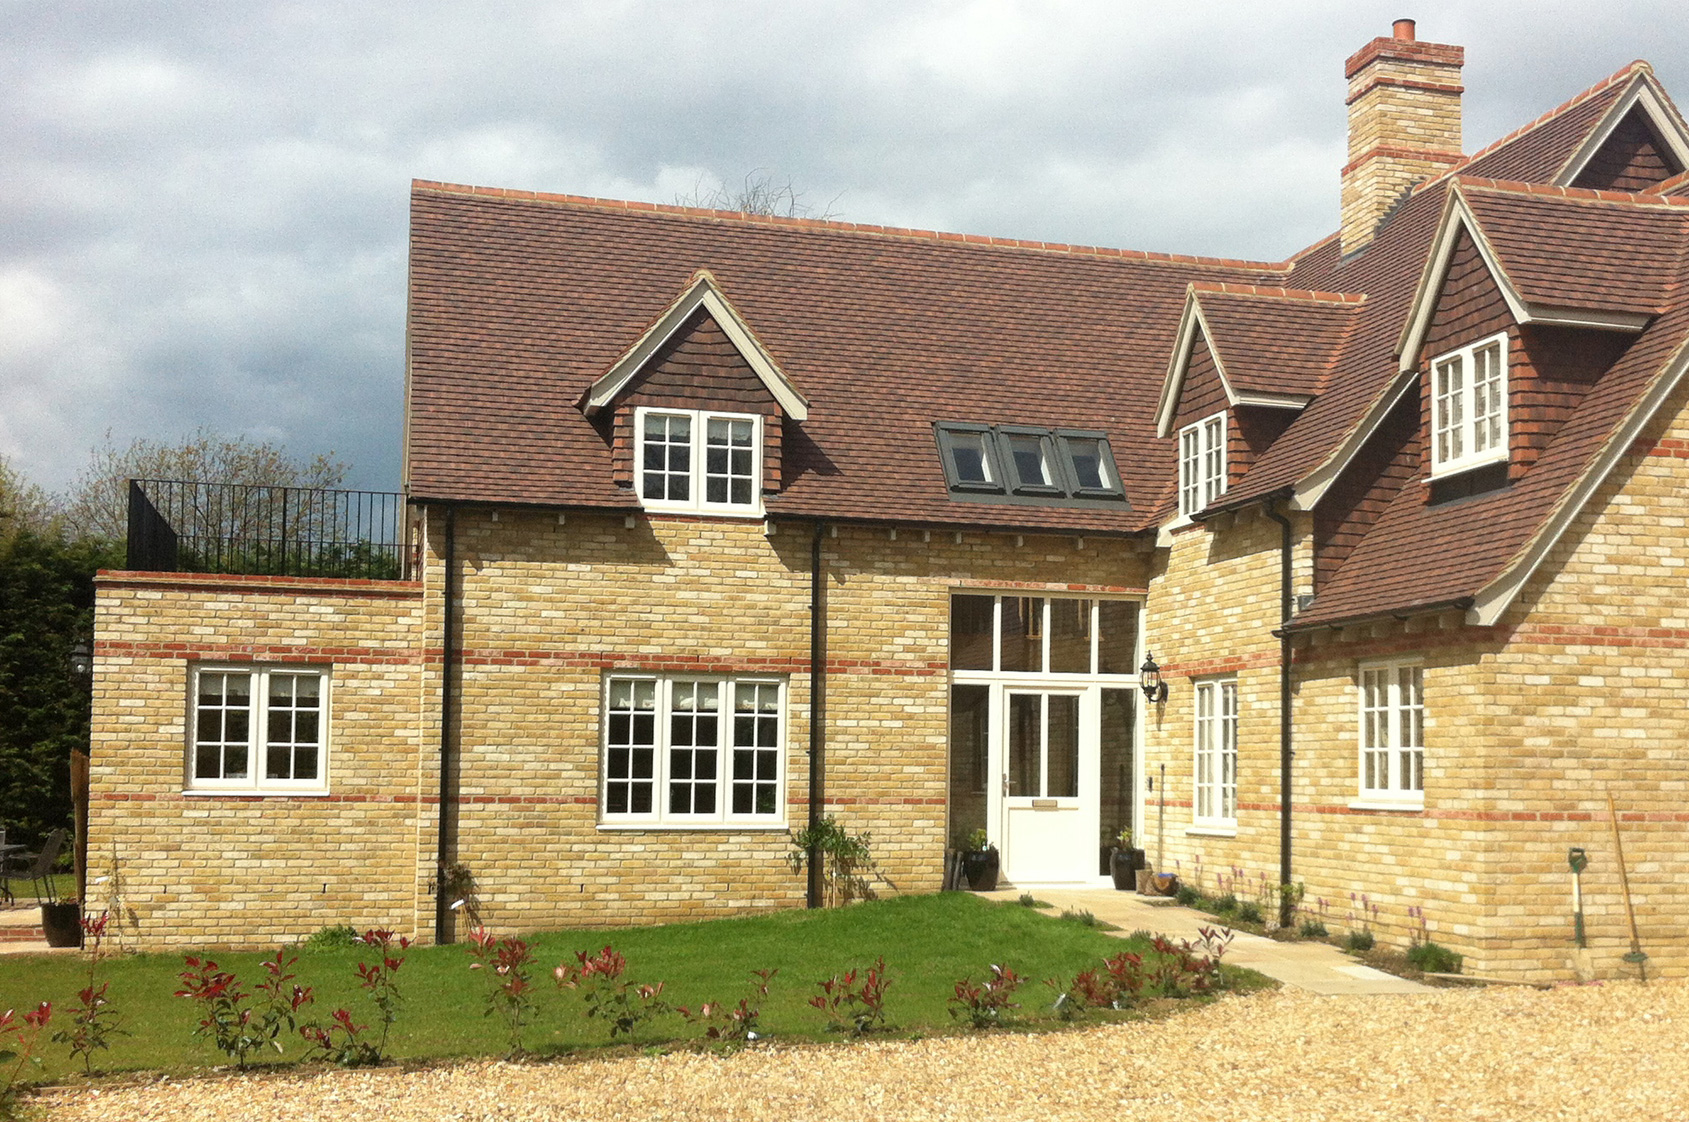 Forge - Self build project management, Bedfordshire, Hertfordshire, Cambridgeshire, Buckinghamshire and the South East